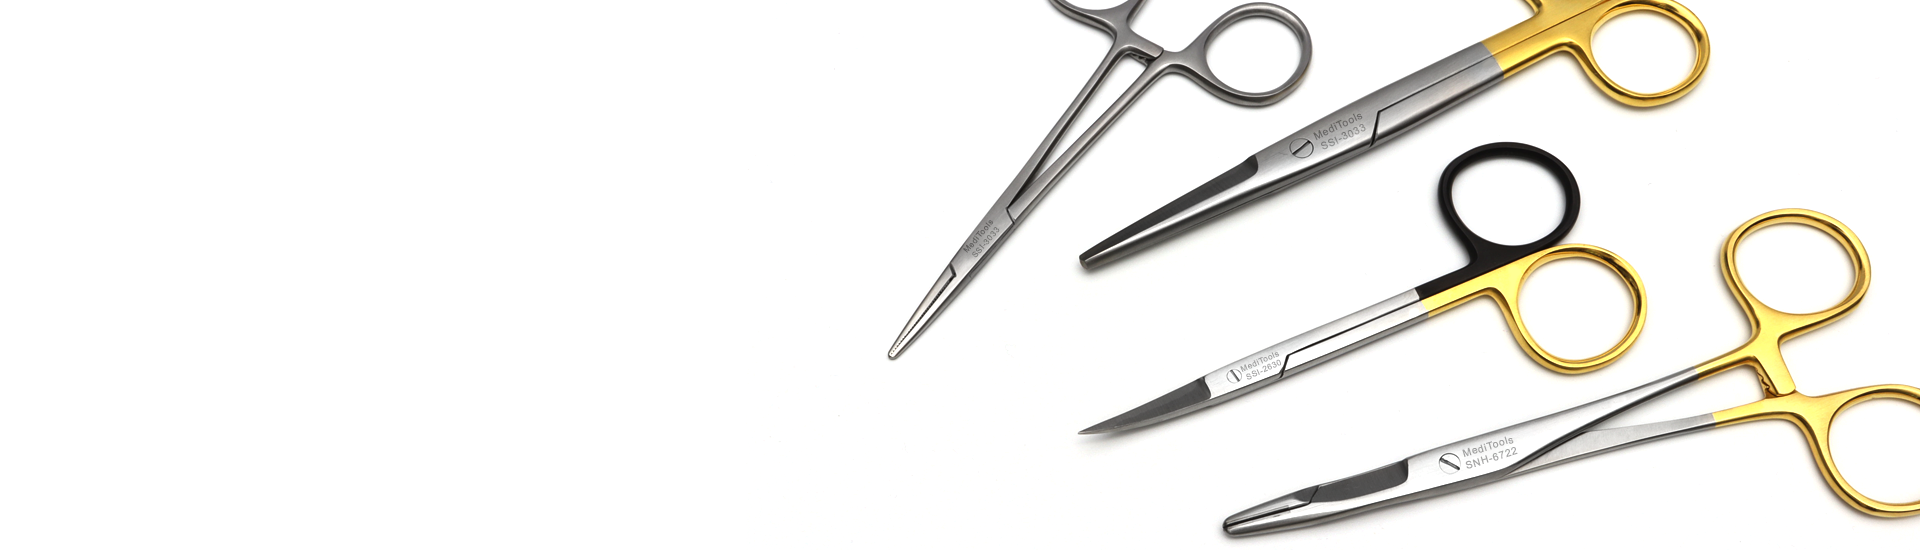 MediTools - Surgical Instruments